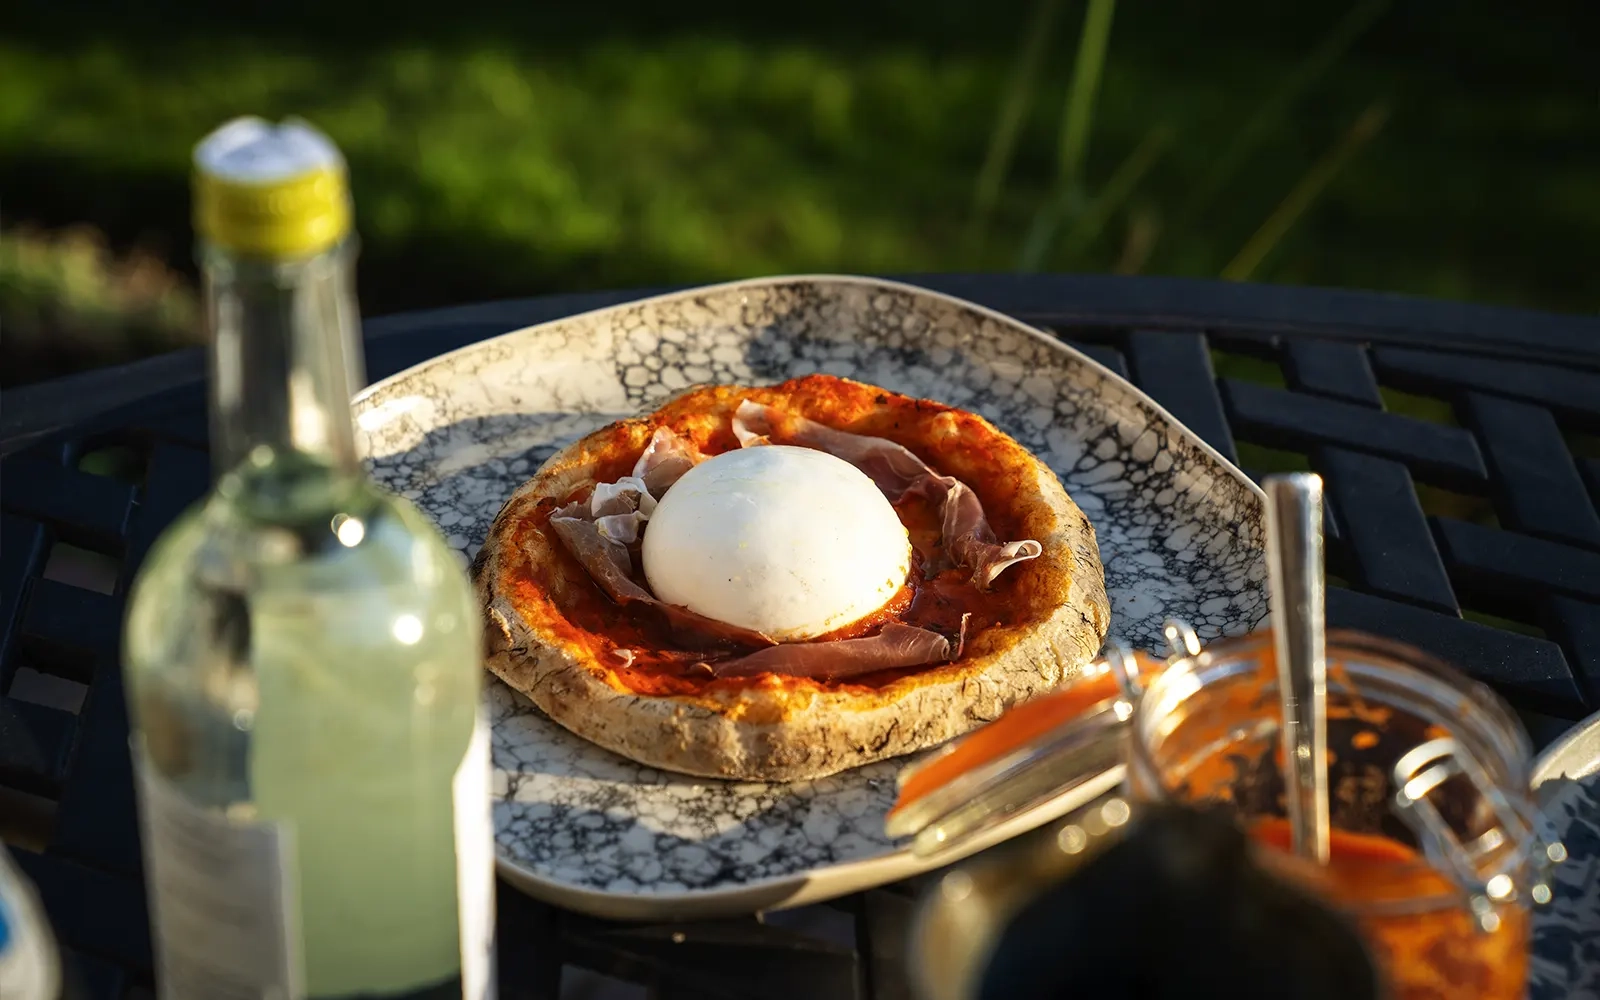 Close-up of a pizza on an outdoor table with a wine bottle in the foreground